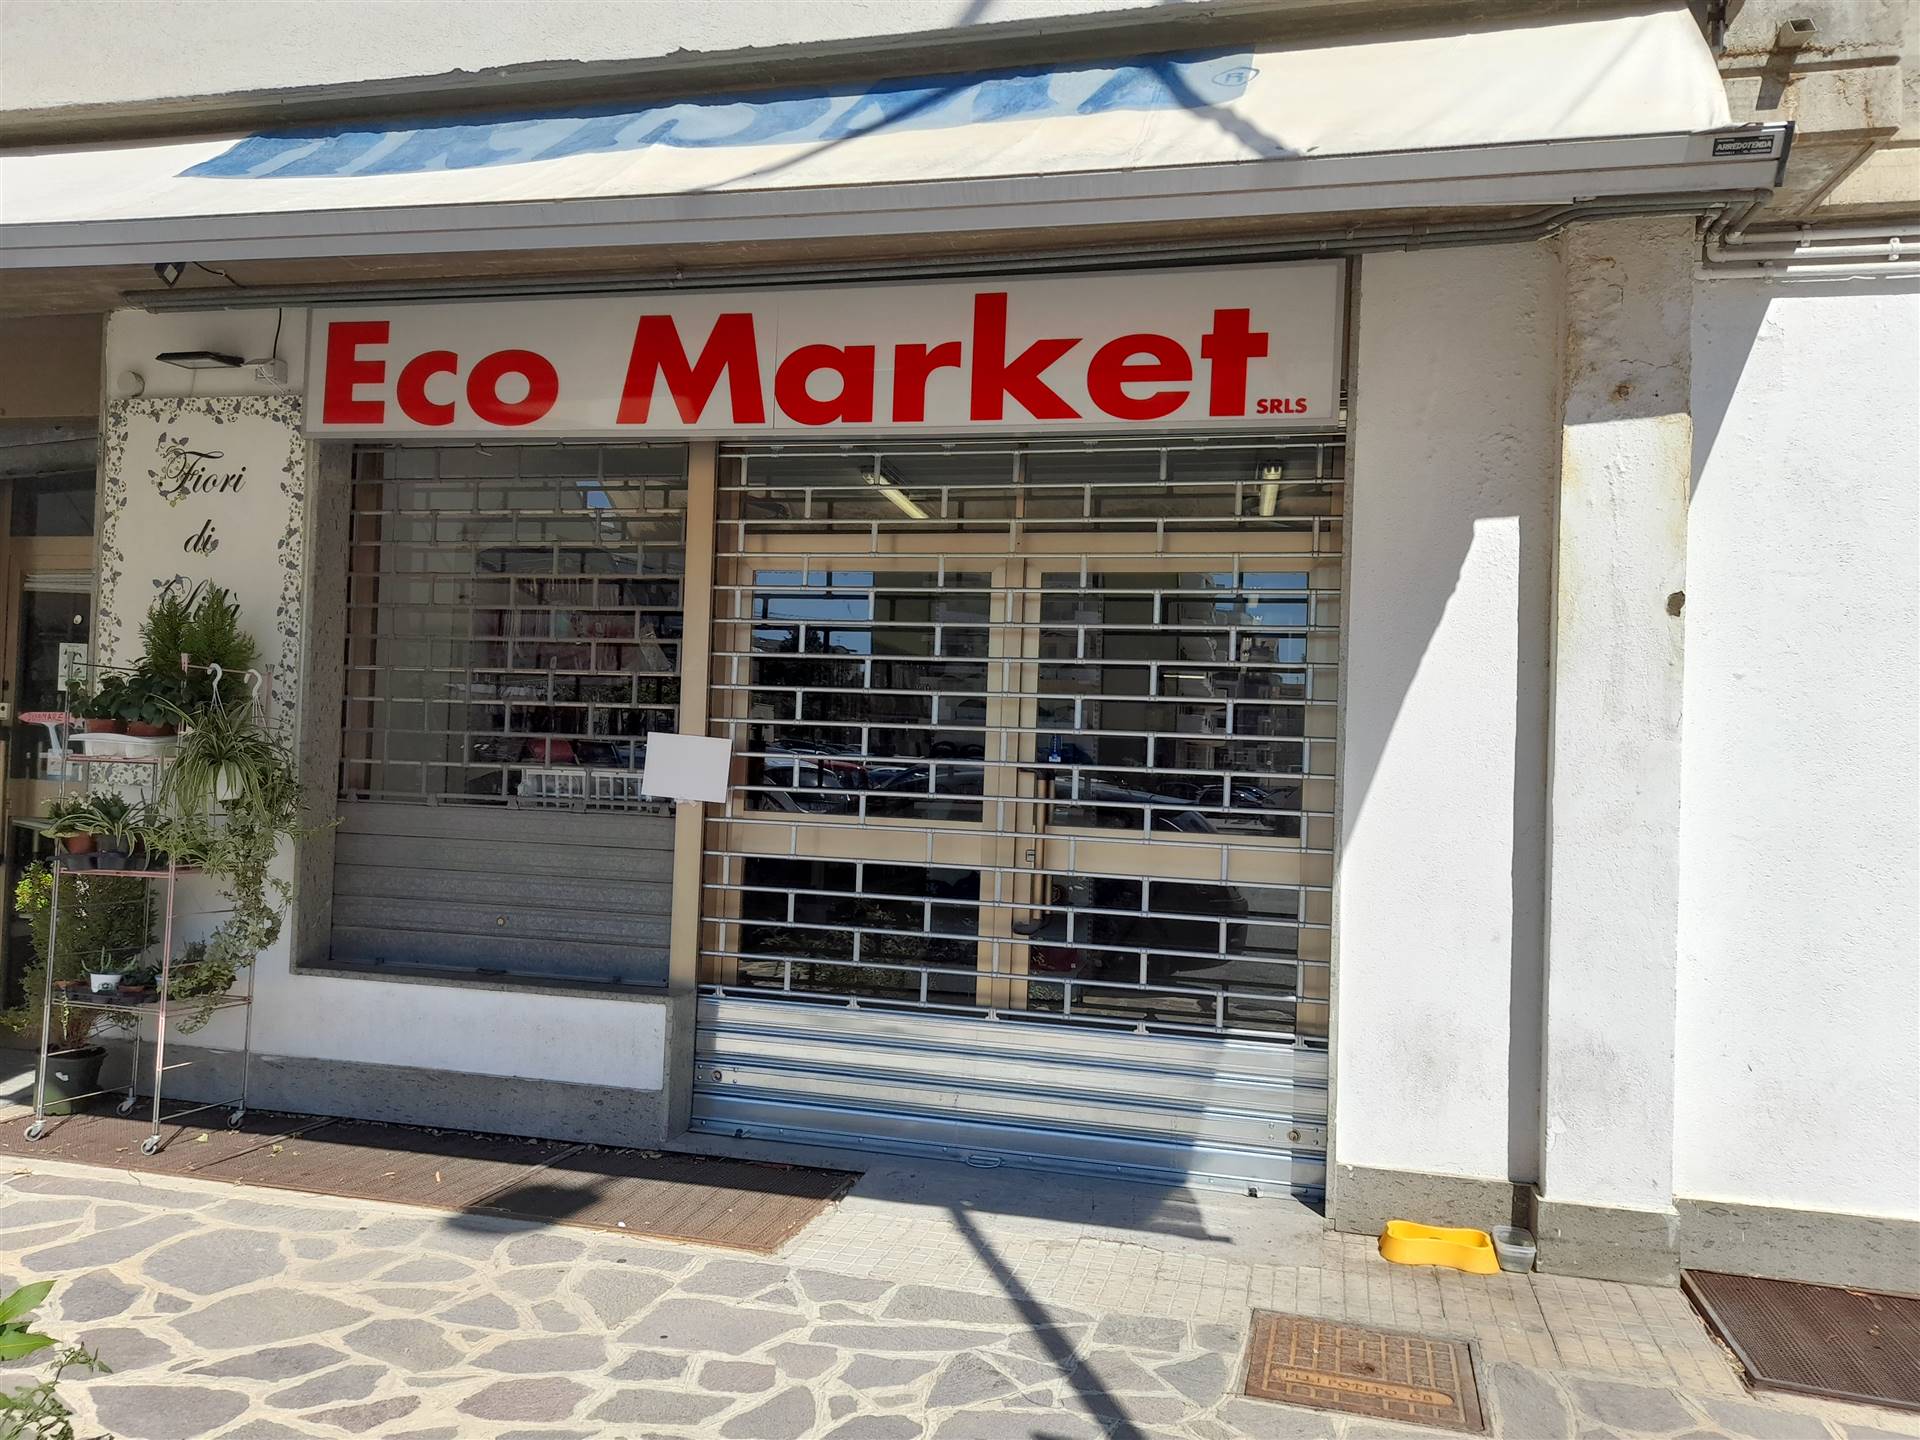 SEMICENTRO, VASTO, Commercial property for rent of 400 Sq. mt., Energetic class: G, Epi: 1 kwh/m3 year, placed at Ground on 4, composed by: 2 Rooms, 